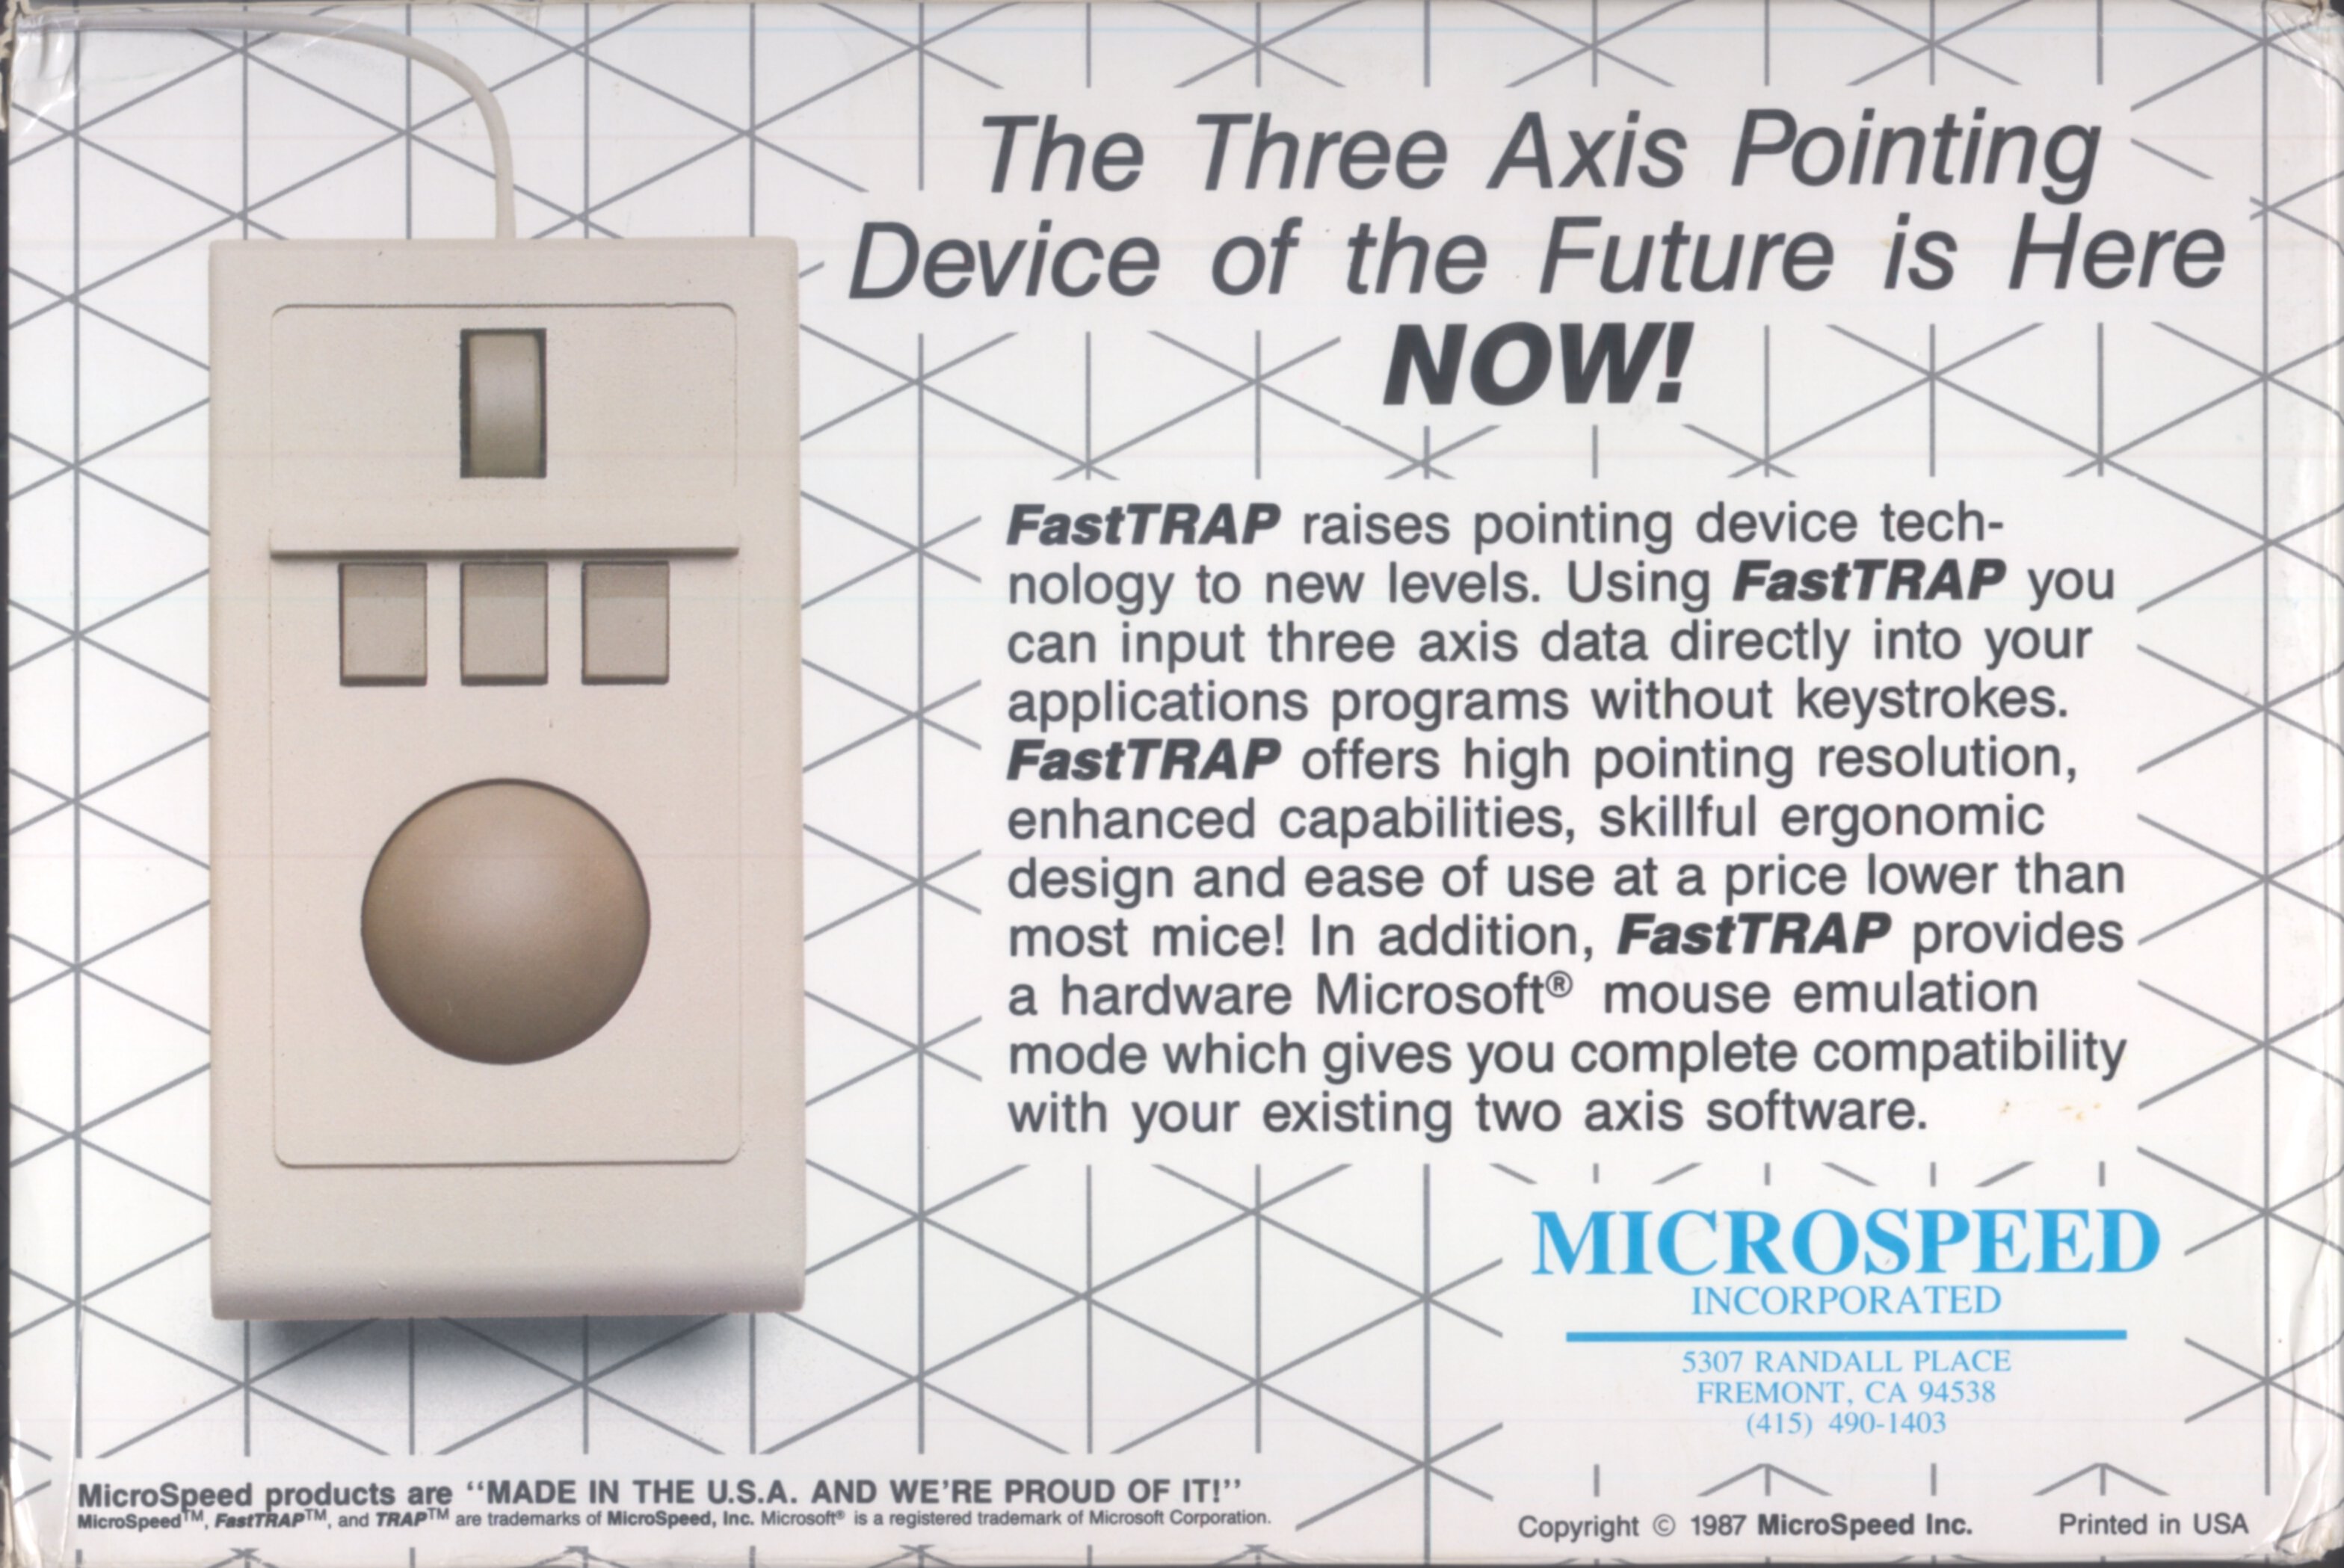 The Three Axis Pointing Device of the Future